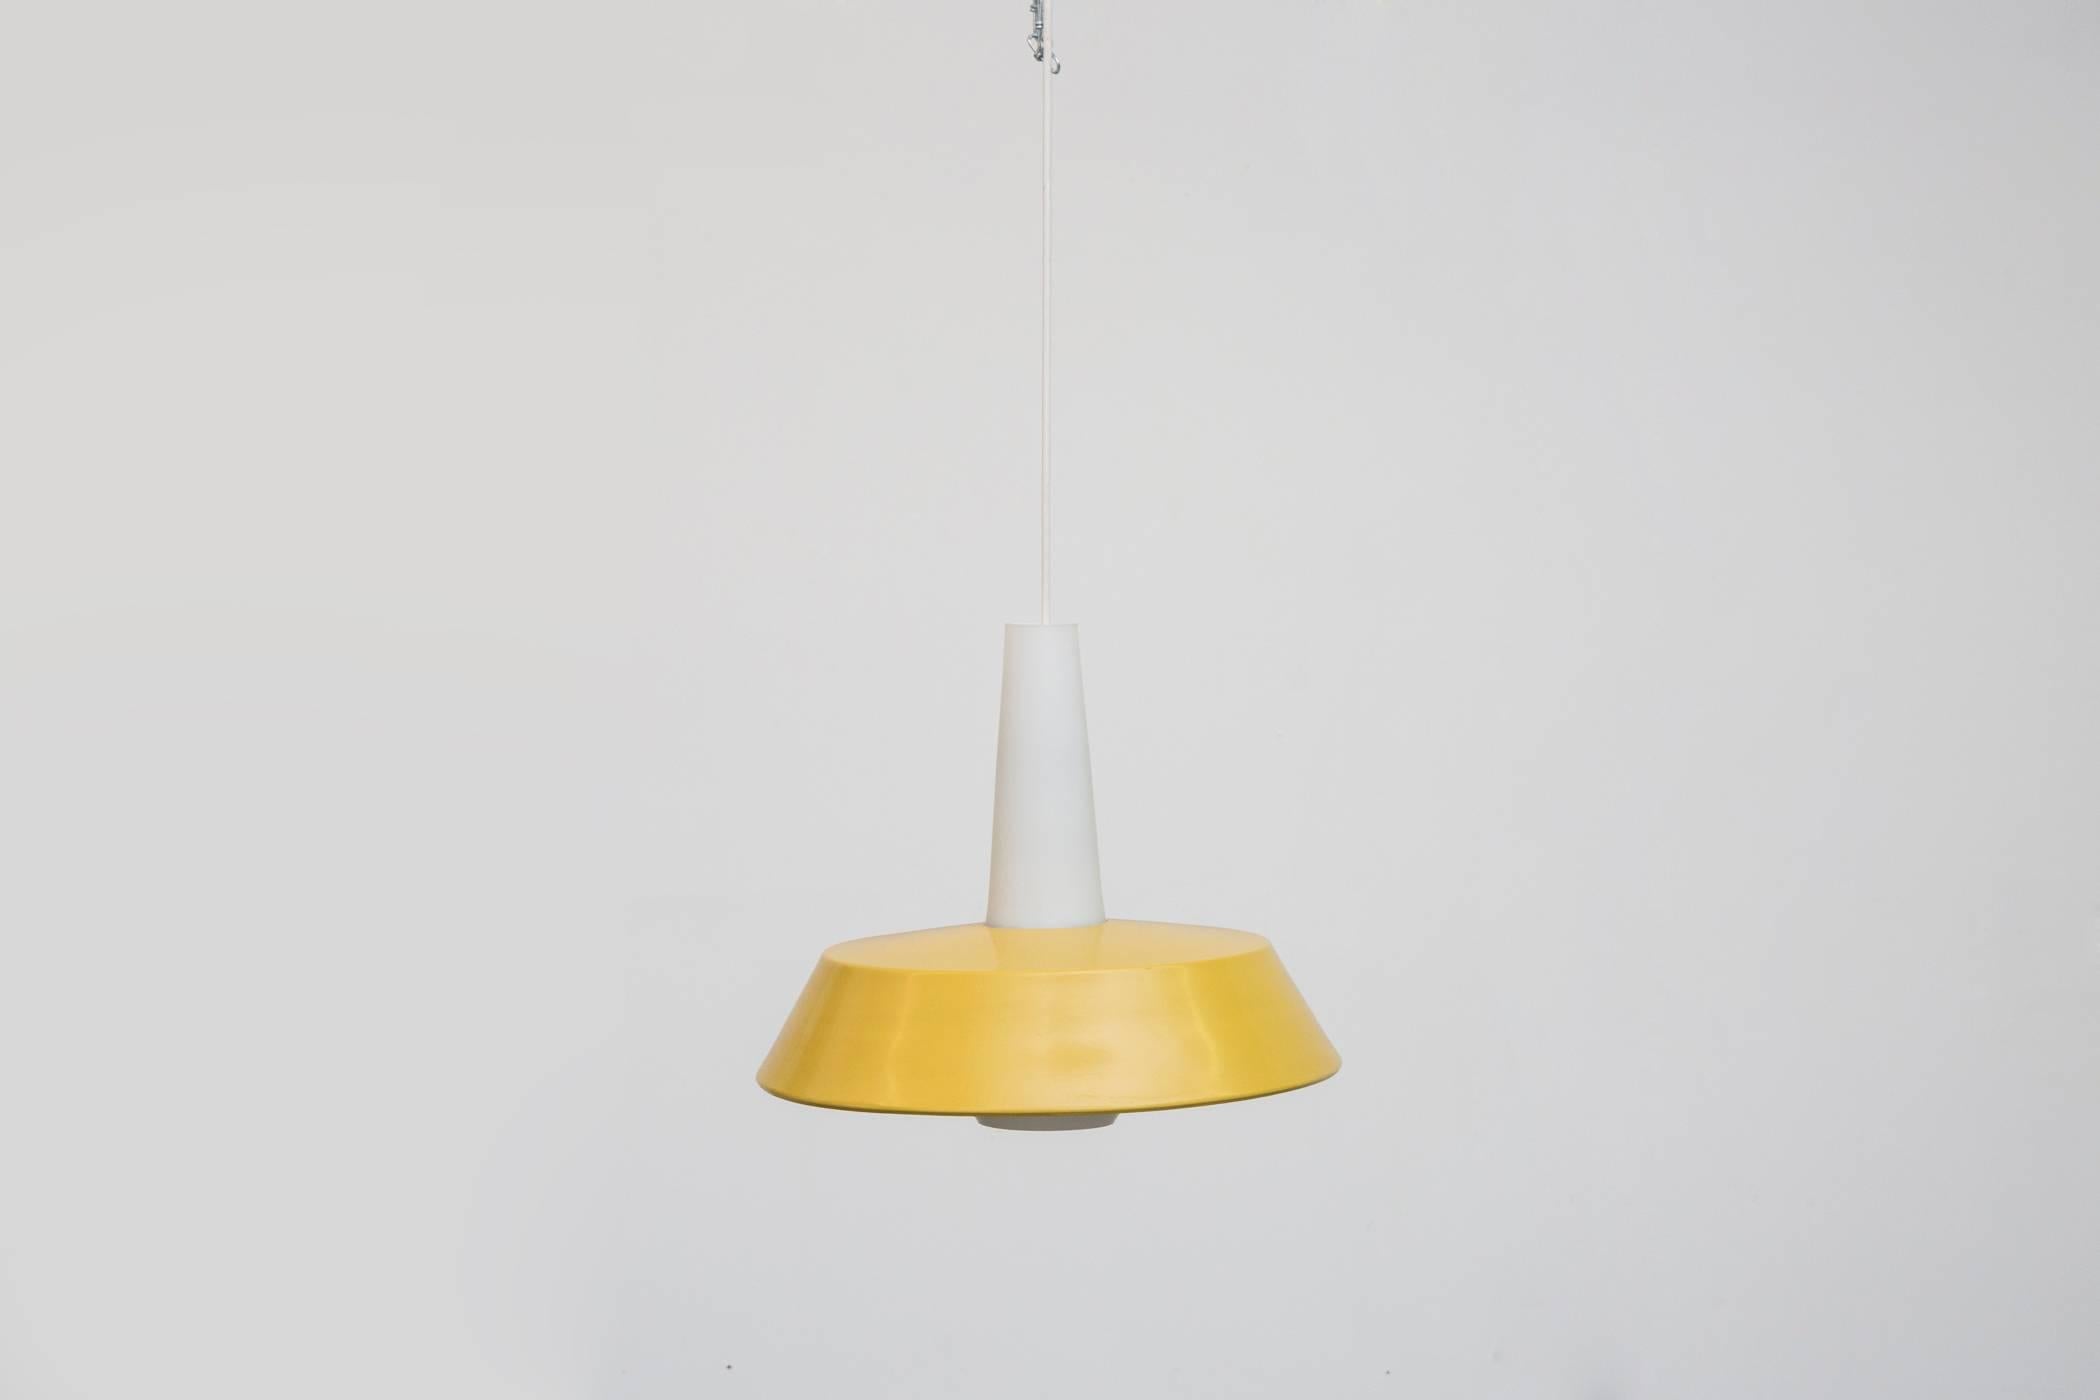 Amazing shaped milk glass lamp with enameled yellow metal hat shade. Nice original condition.